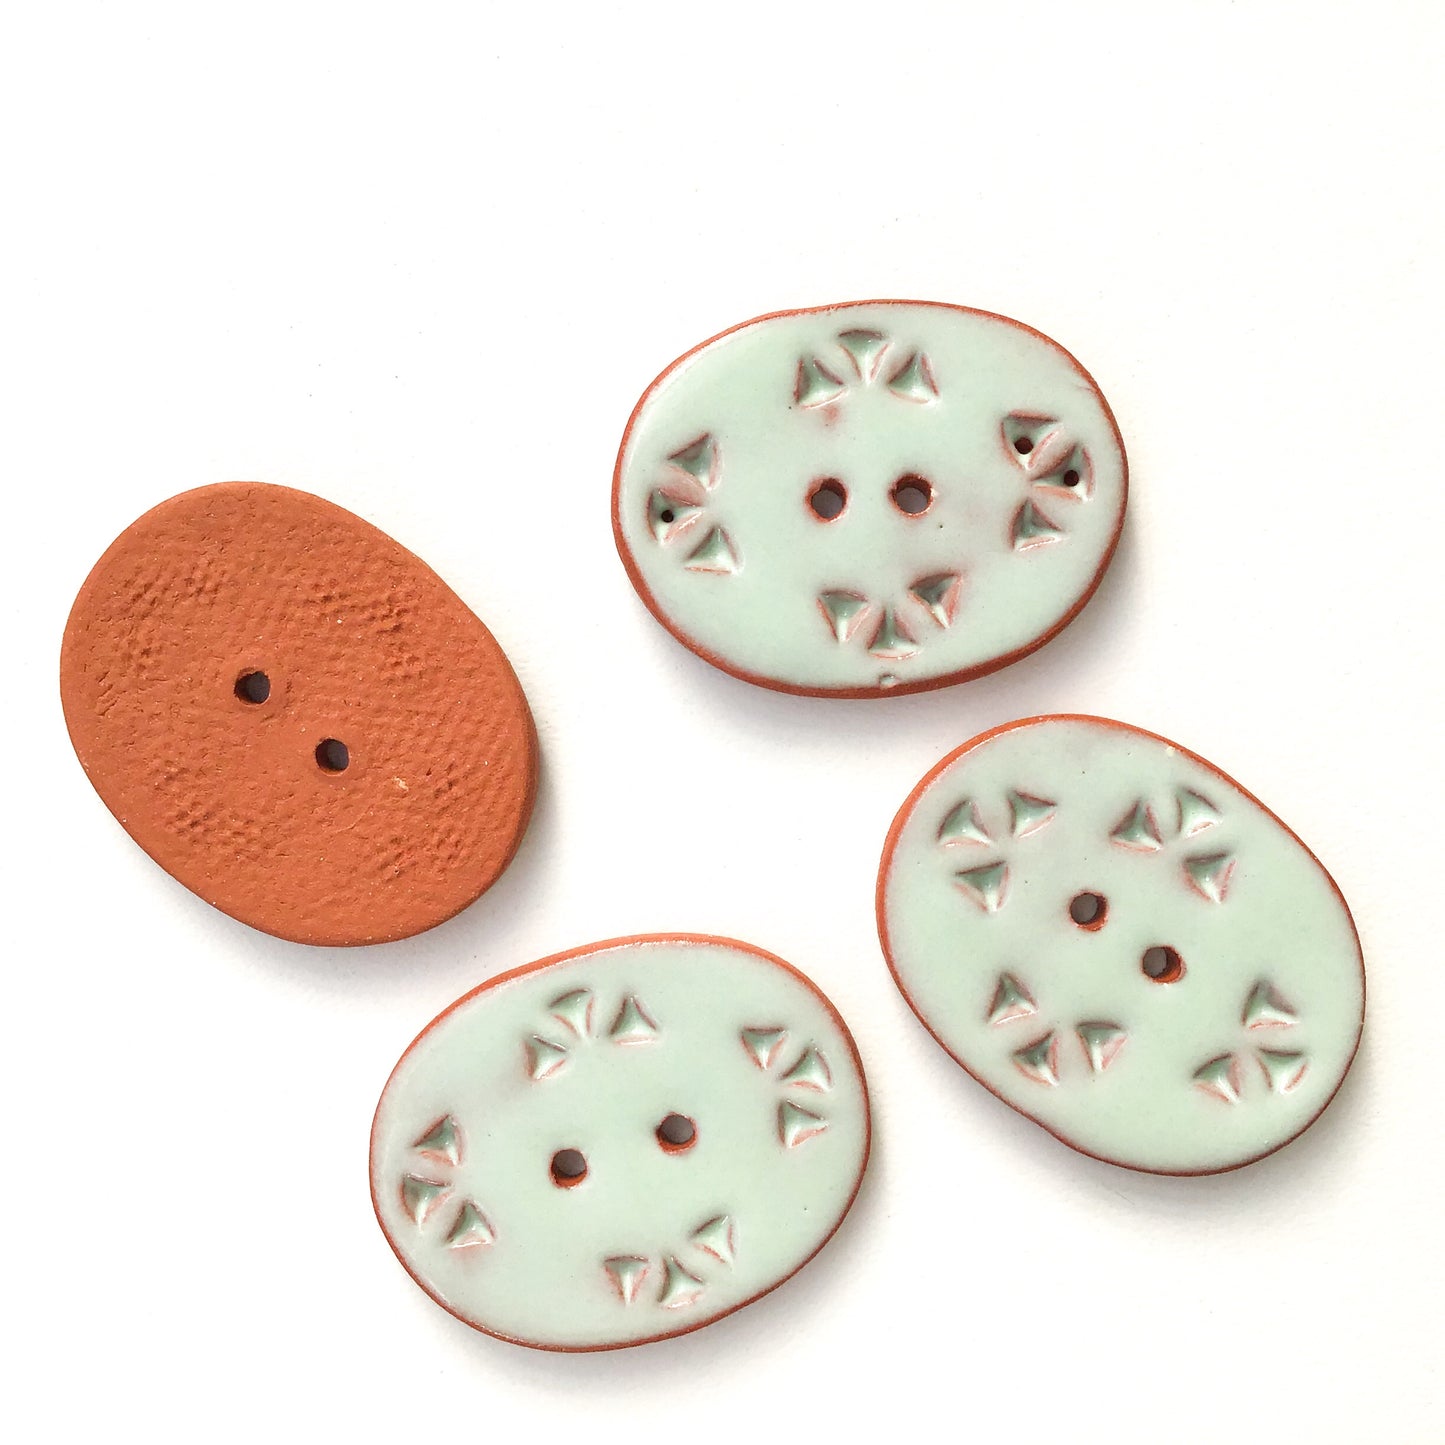 Light Aqua Ceramic Buttons - Oval Clay Buttons on Red Clay - 1" x 1 1/4" (ws-107)